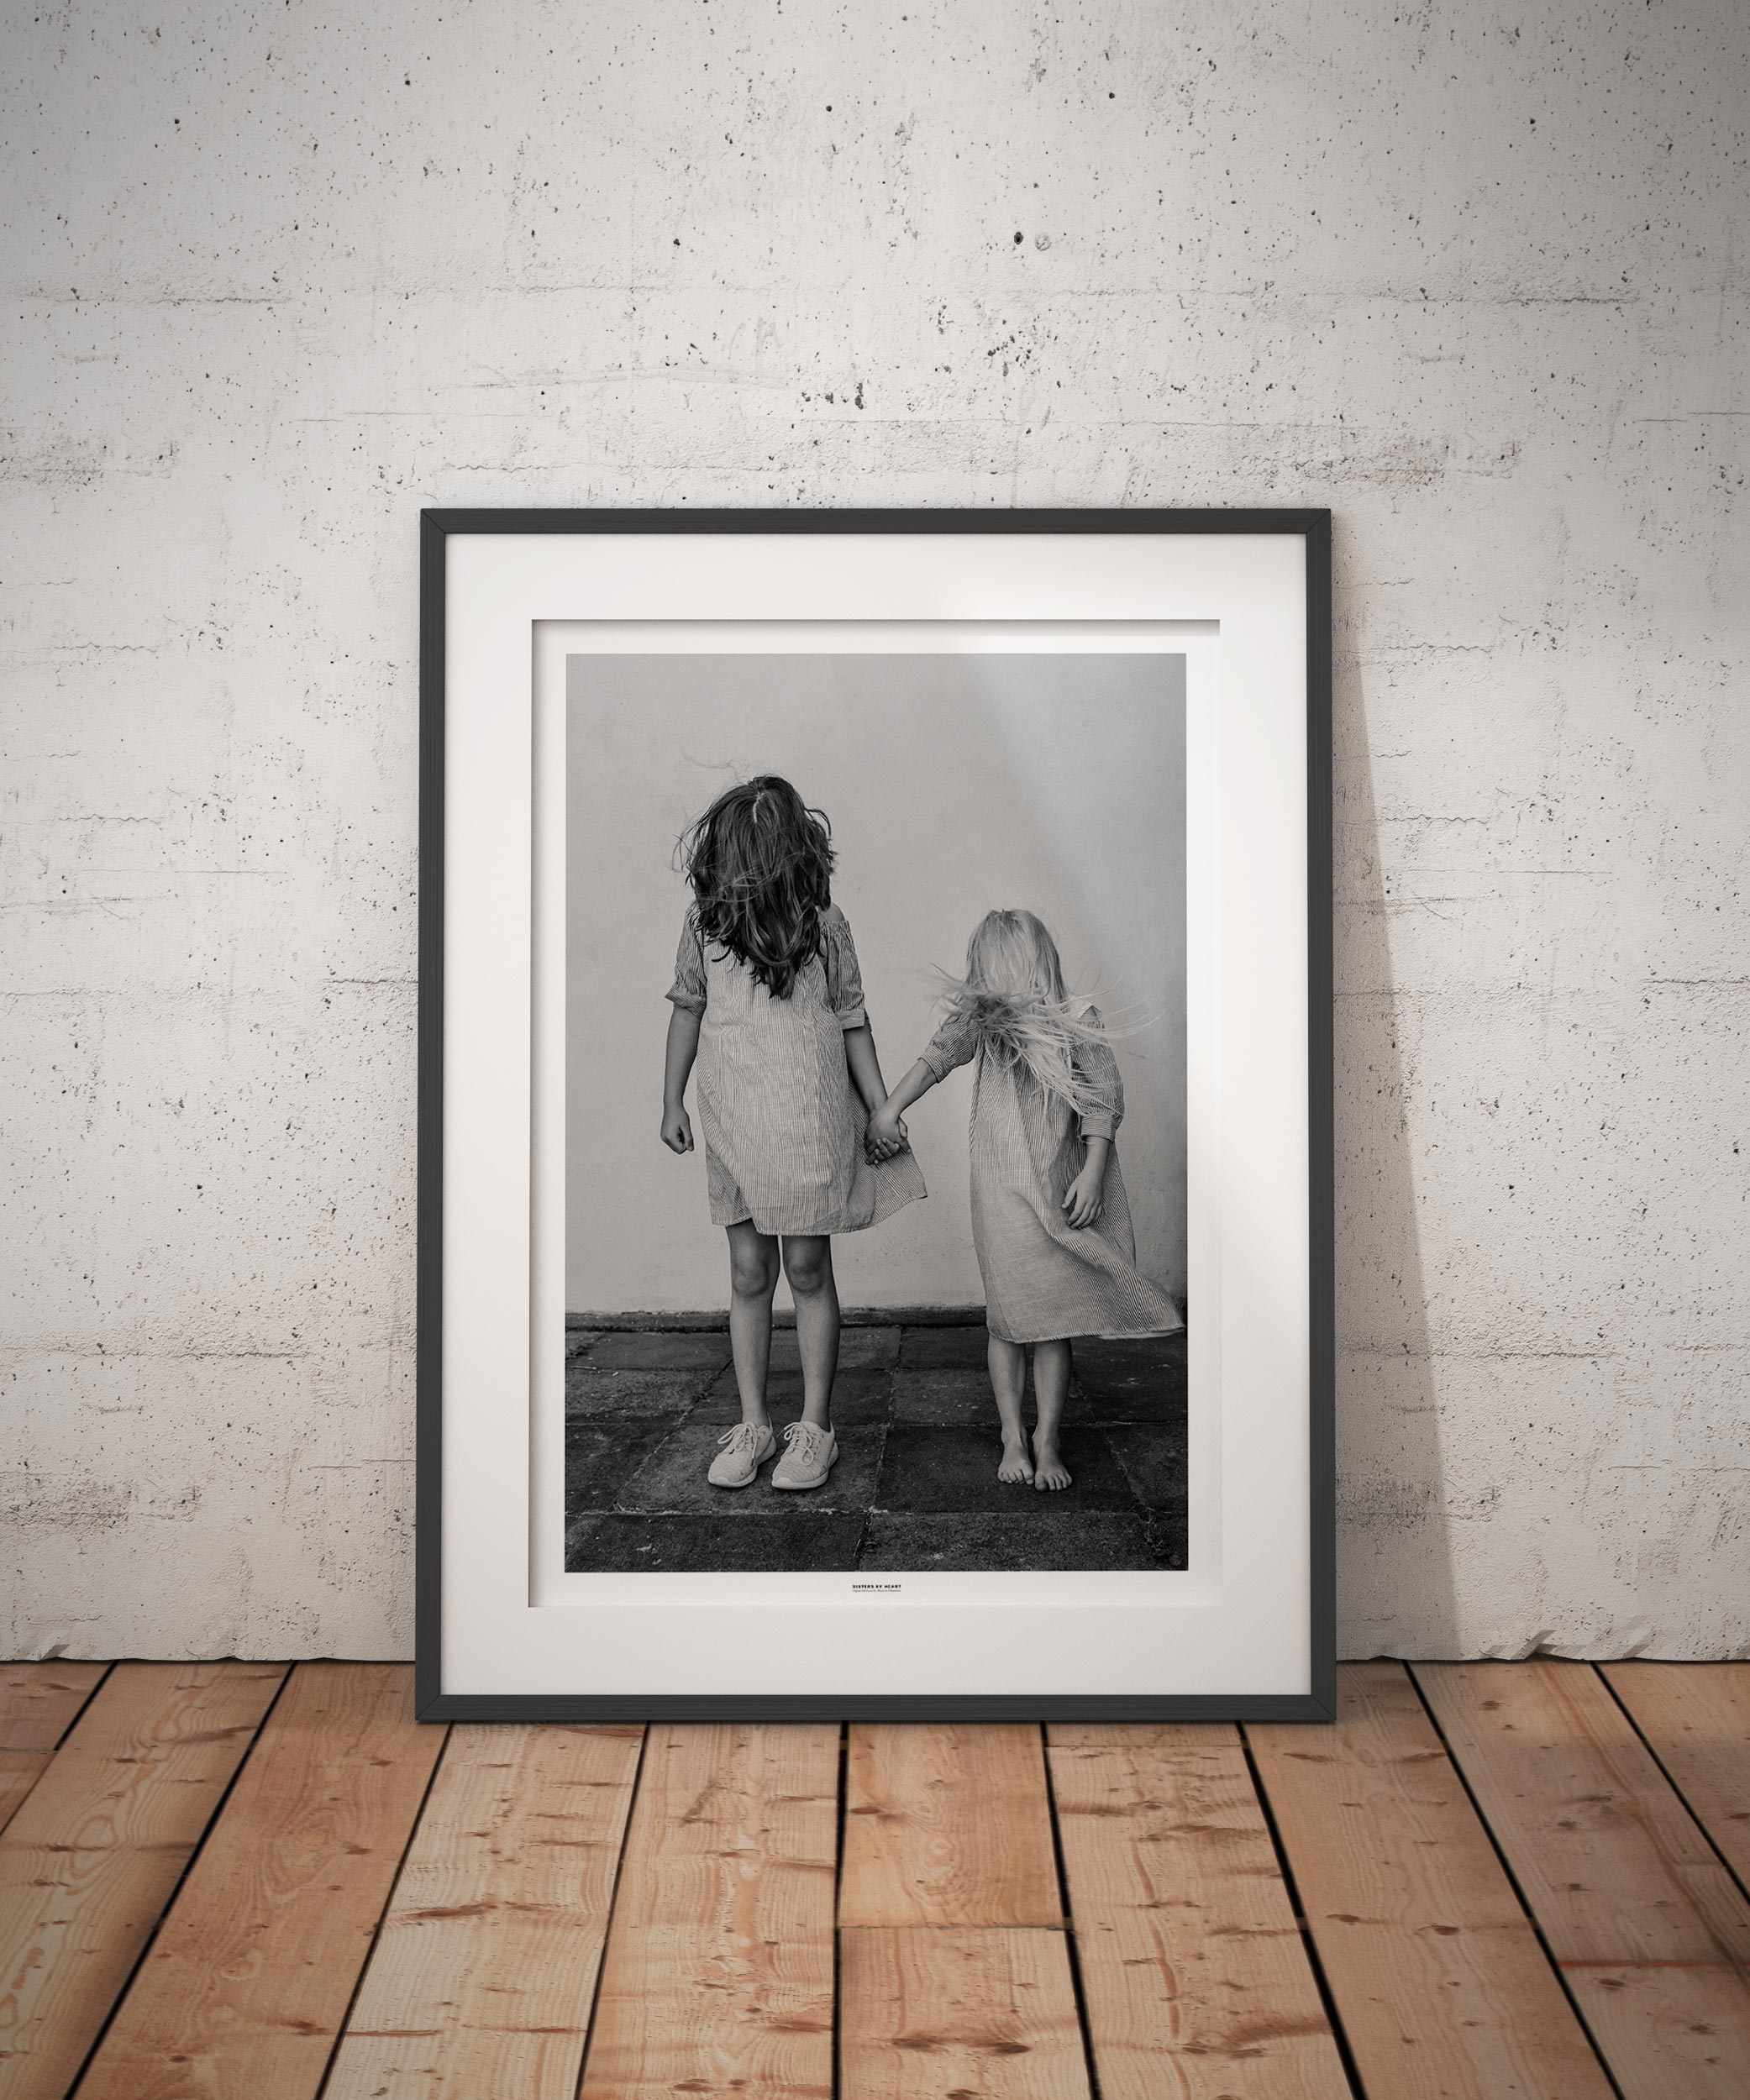 Sisters By Heart. Photo by photographer Martin Thaulow. Open Edition (seen in a frame in an environment. The frame is not part of sale). Buy high quality print.